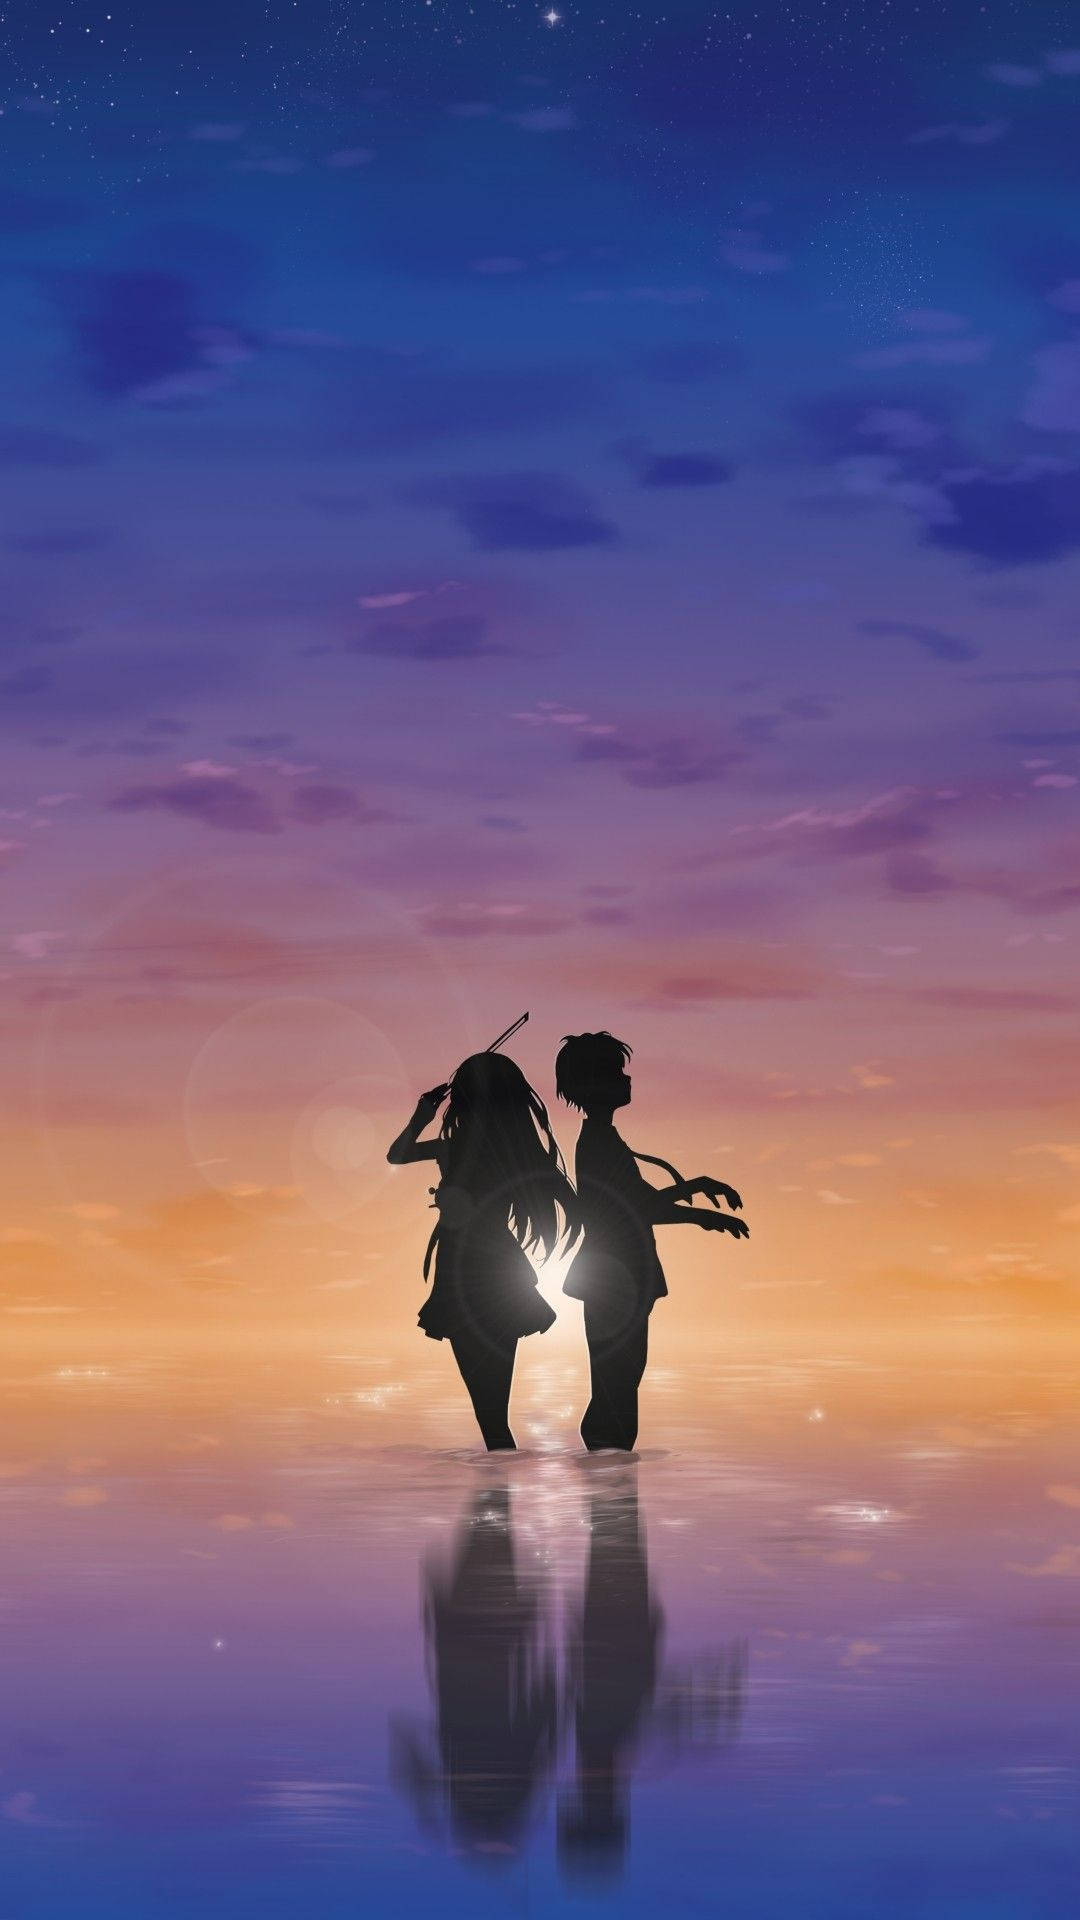 Kaori and Kosei in a bittersweet moment of love and pain Wallpaper